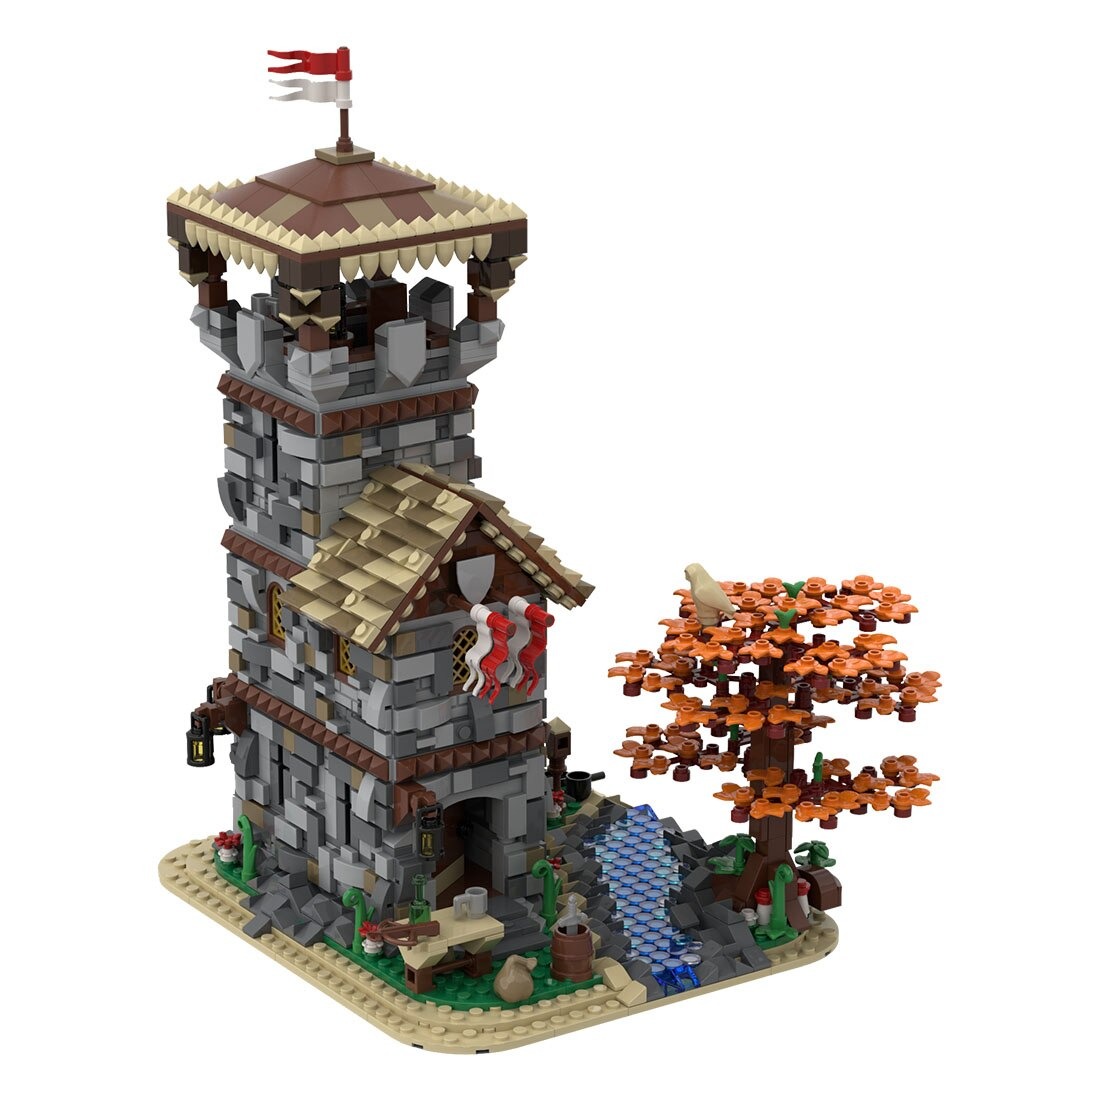 Medieval Guard House By The River Version 2.0 Moc 106523 5 (2)